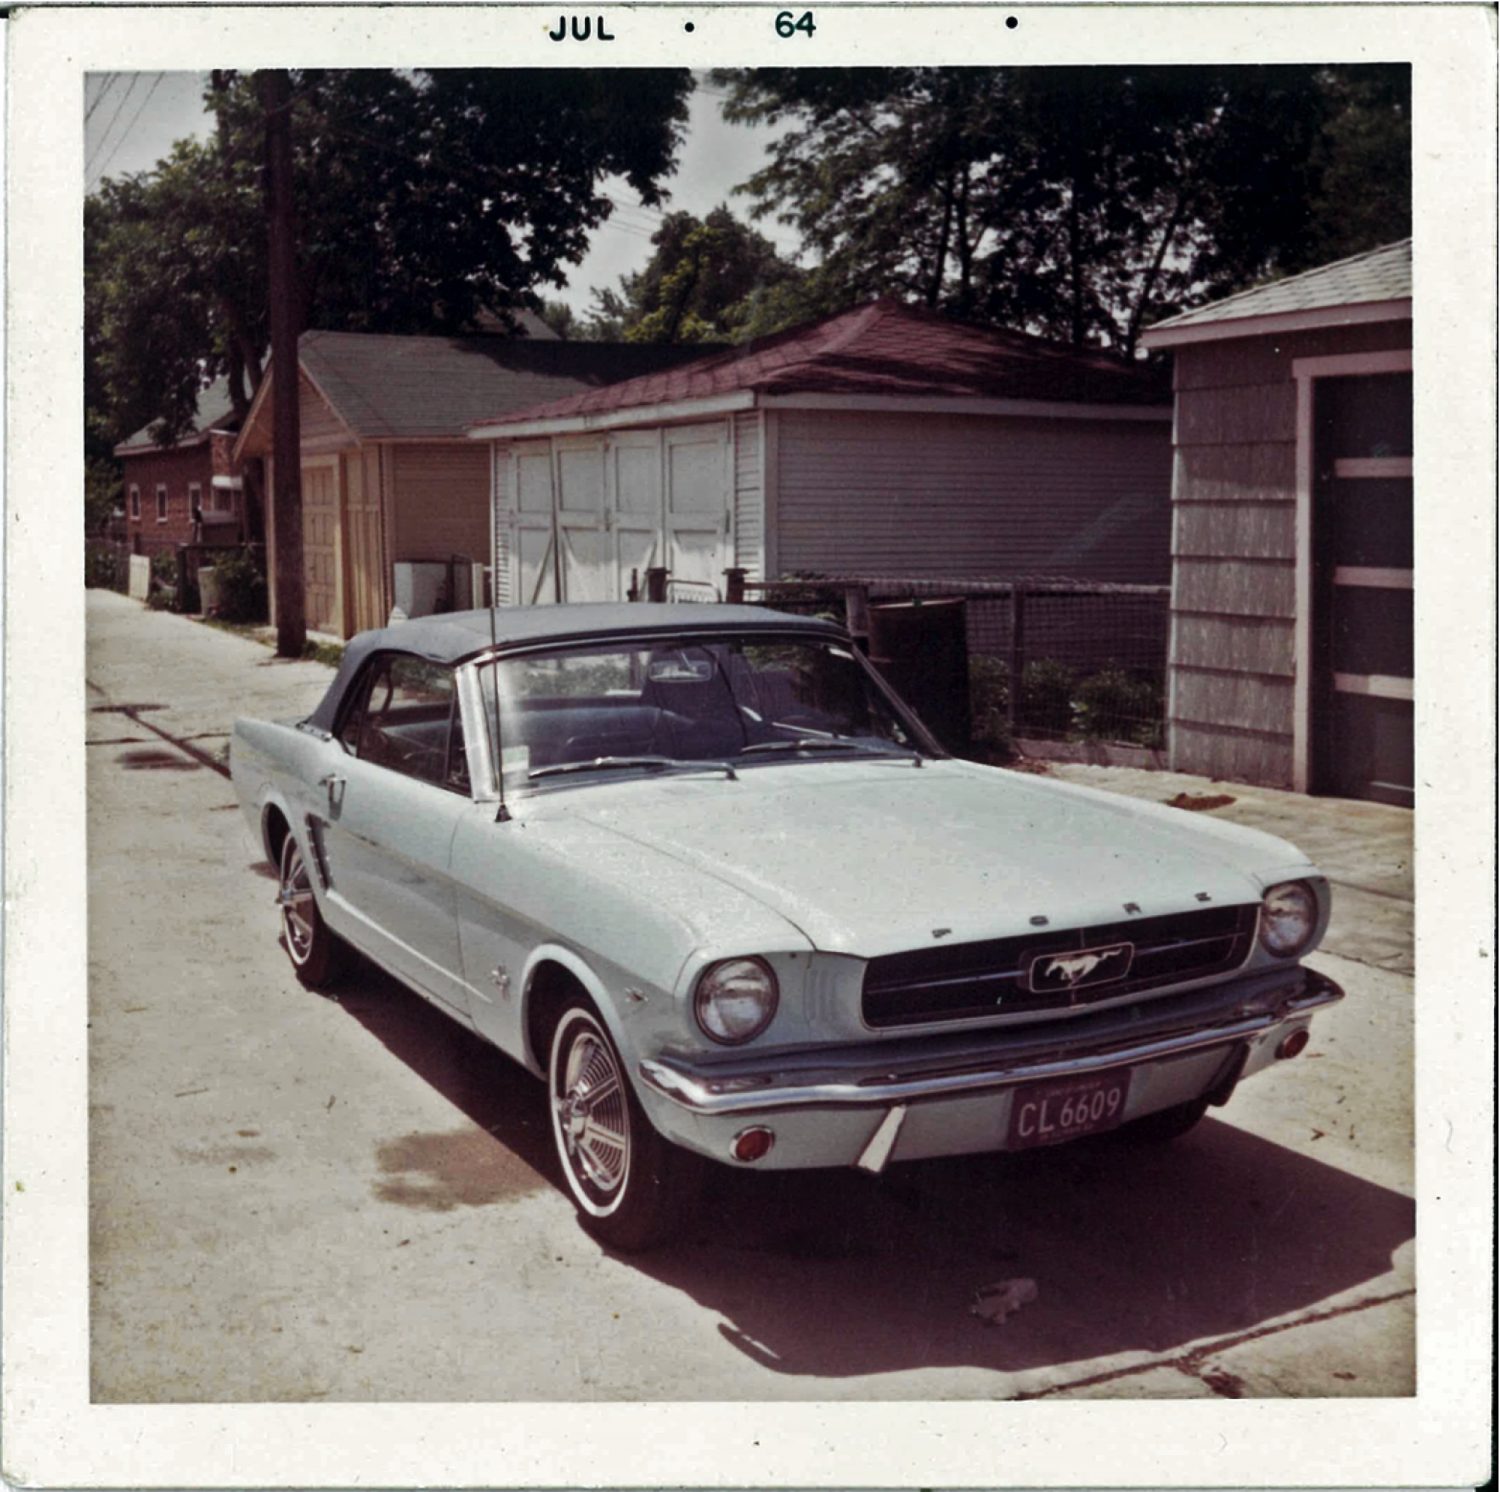 Gail Wise's 1965 Ford Mustang Convertible in summer 1964